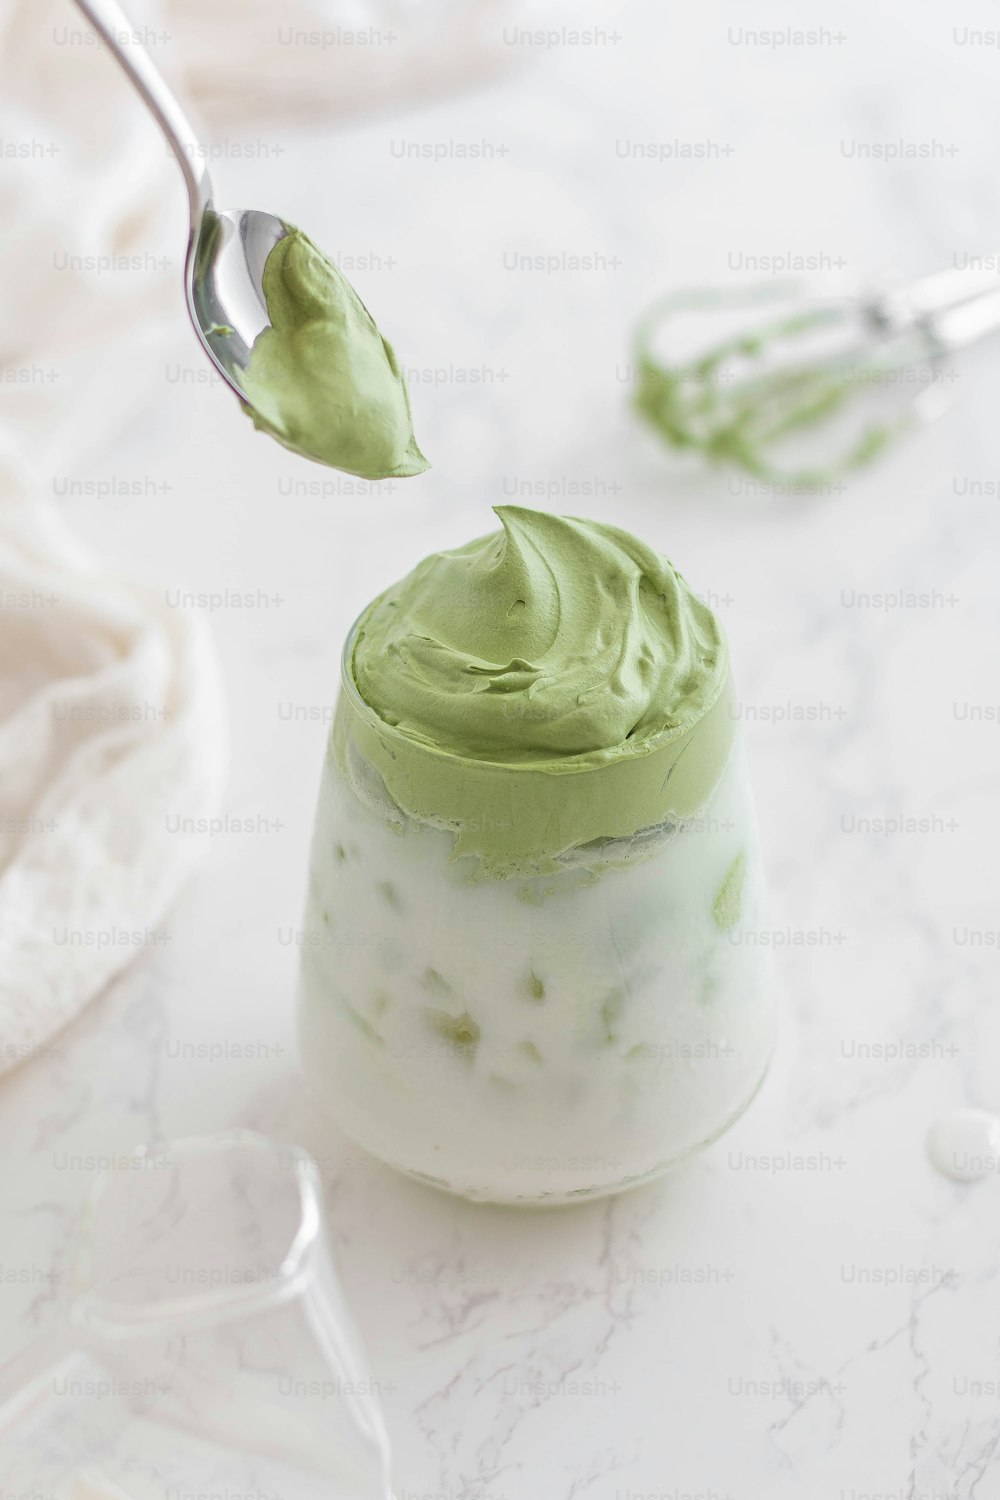 a spoon with some green cream on it